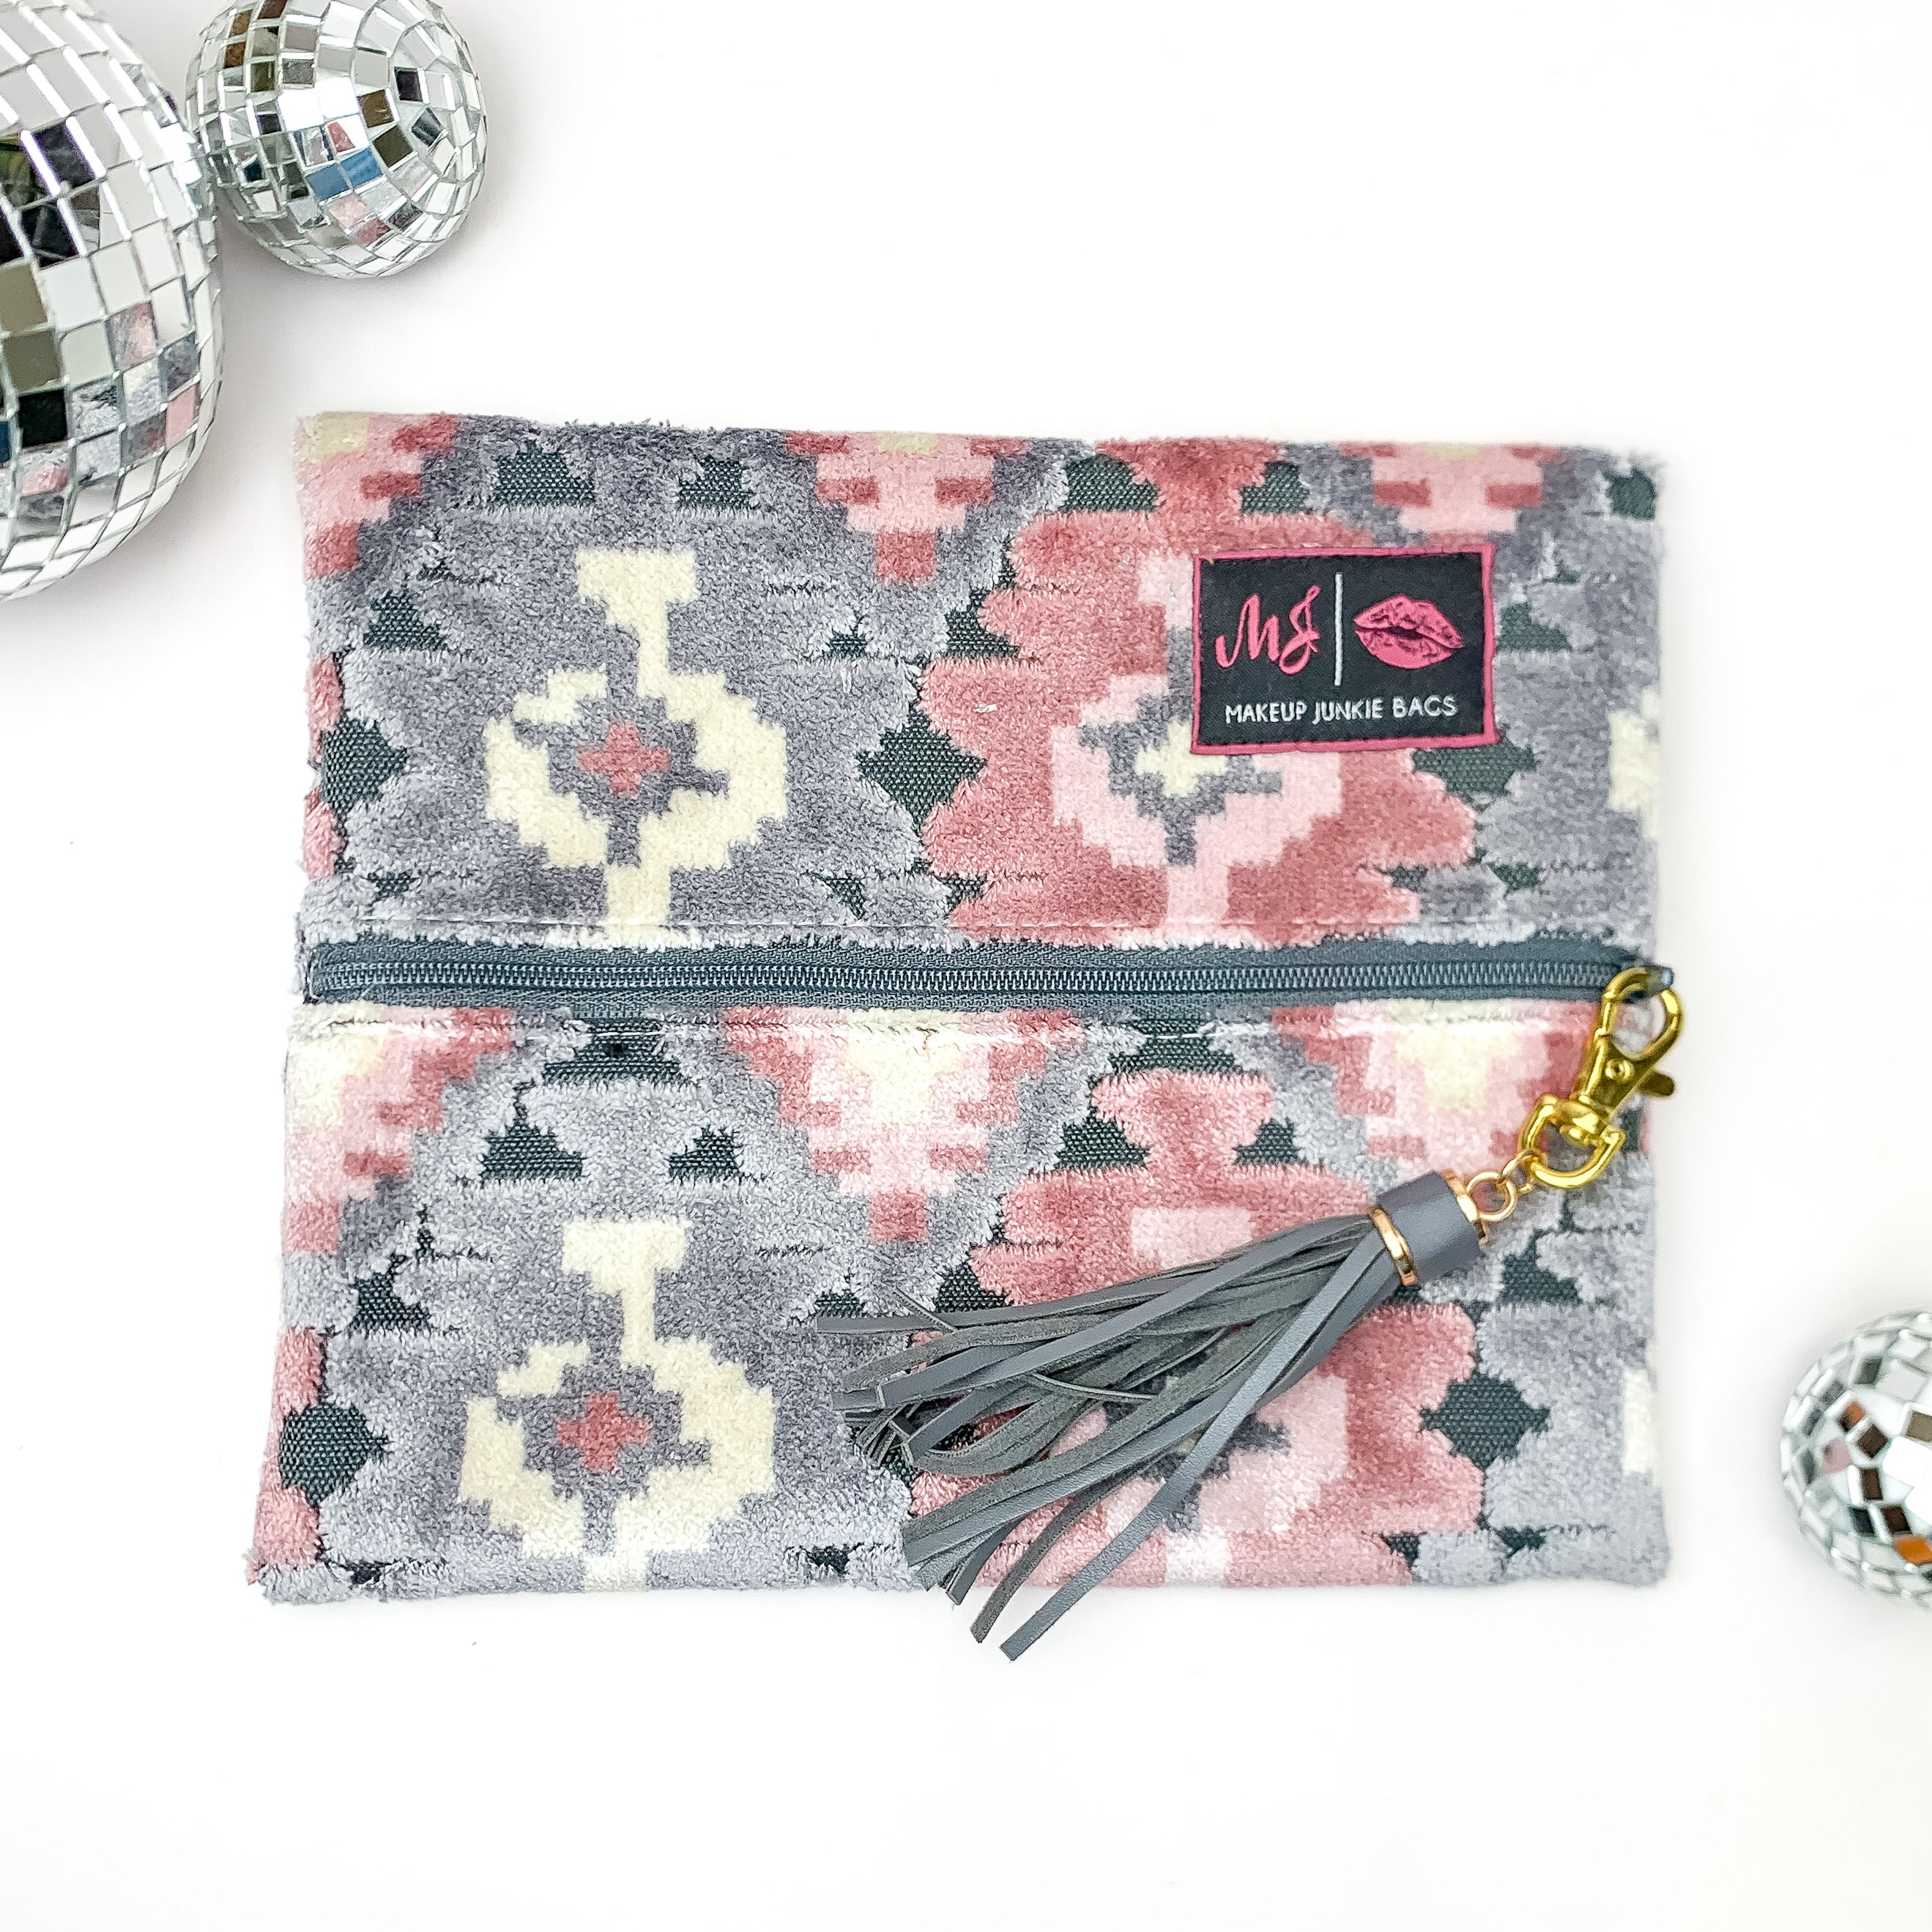 Makeup Junkie | Small Blush Aztec Lay Flat Bag in Blush Pink and Grey Mix